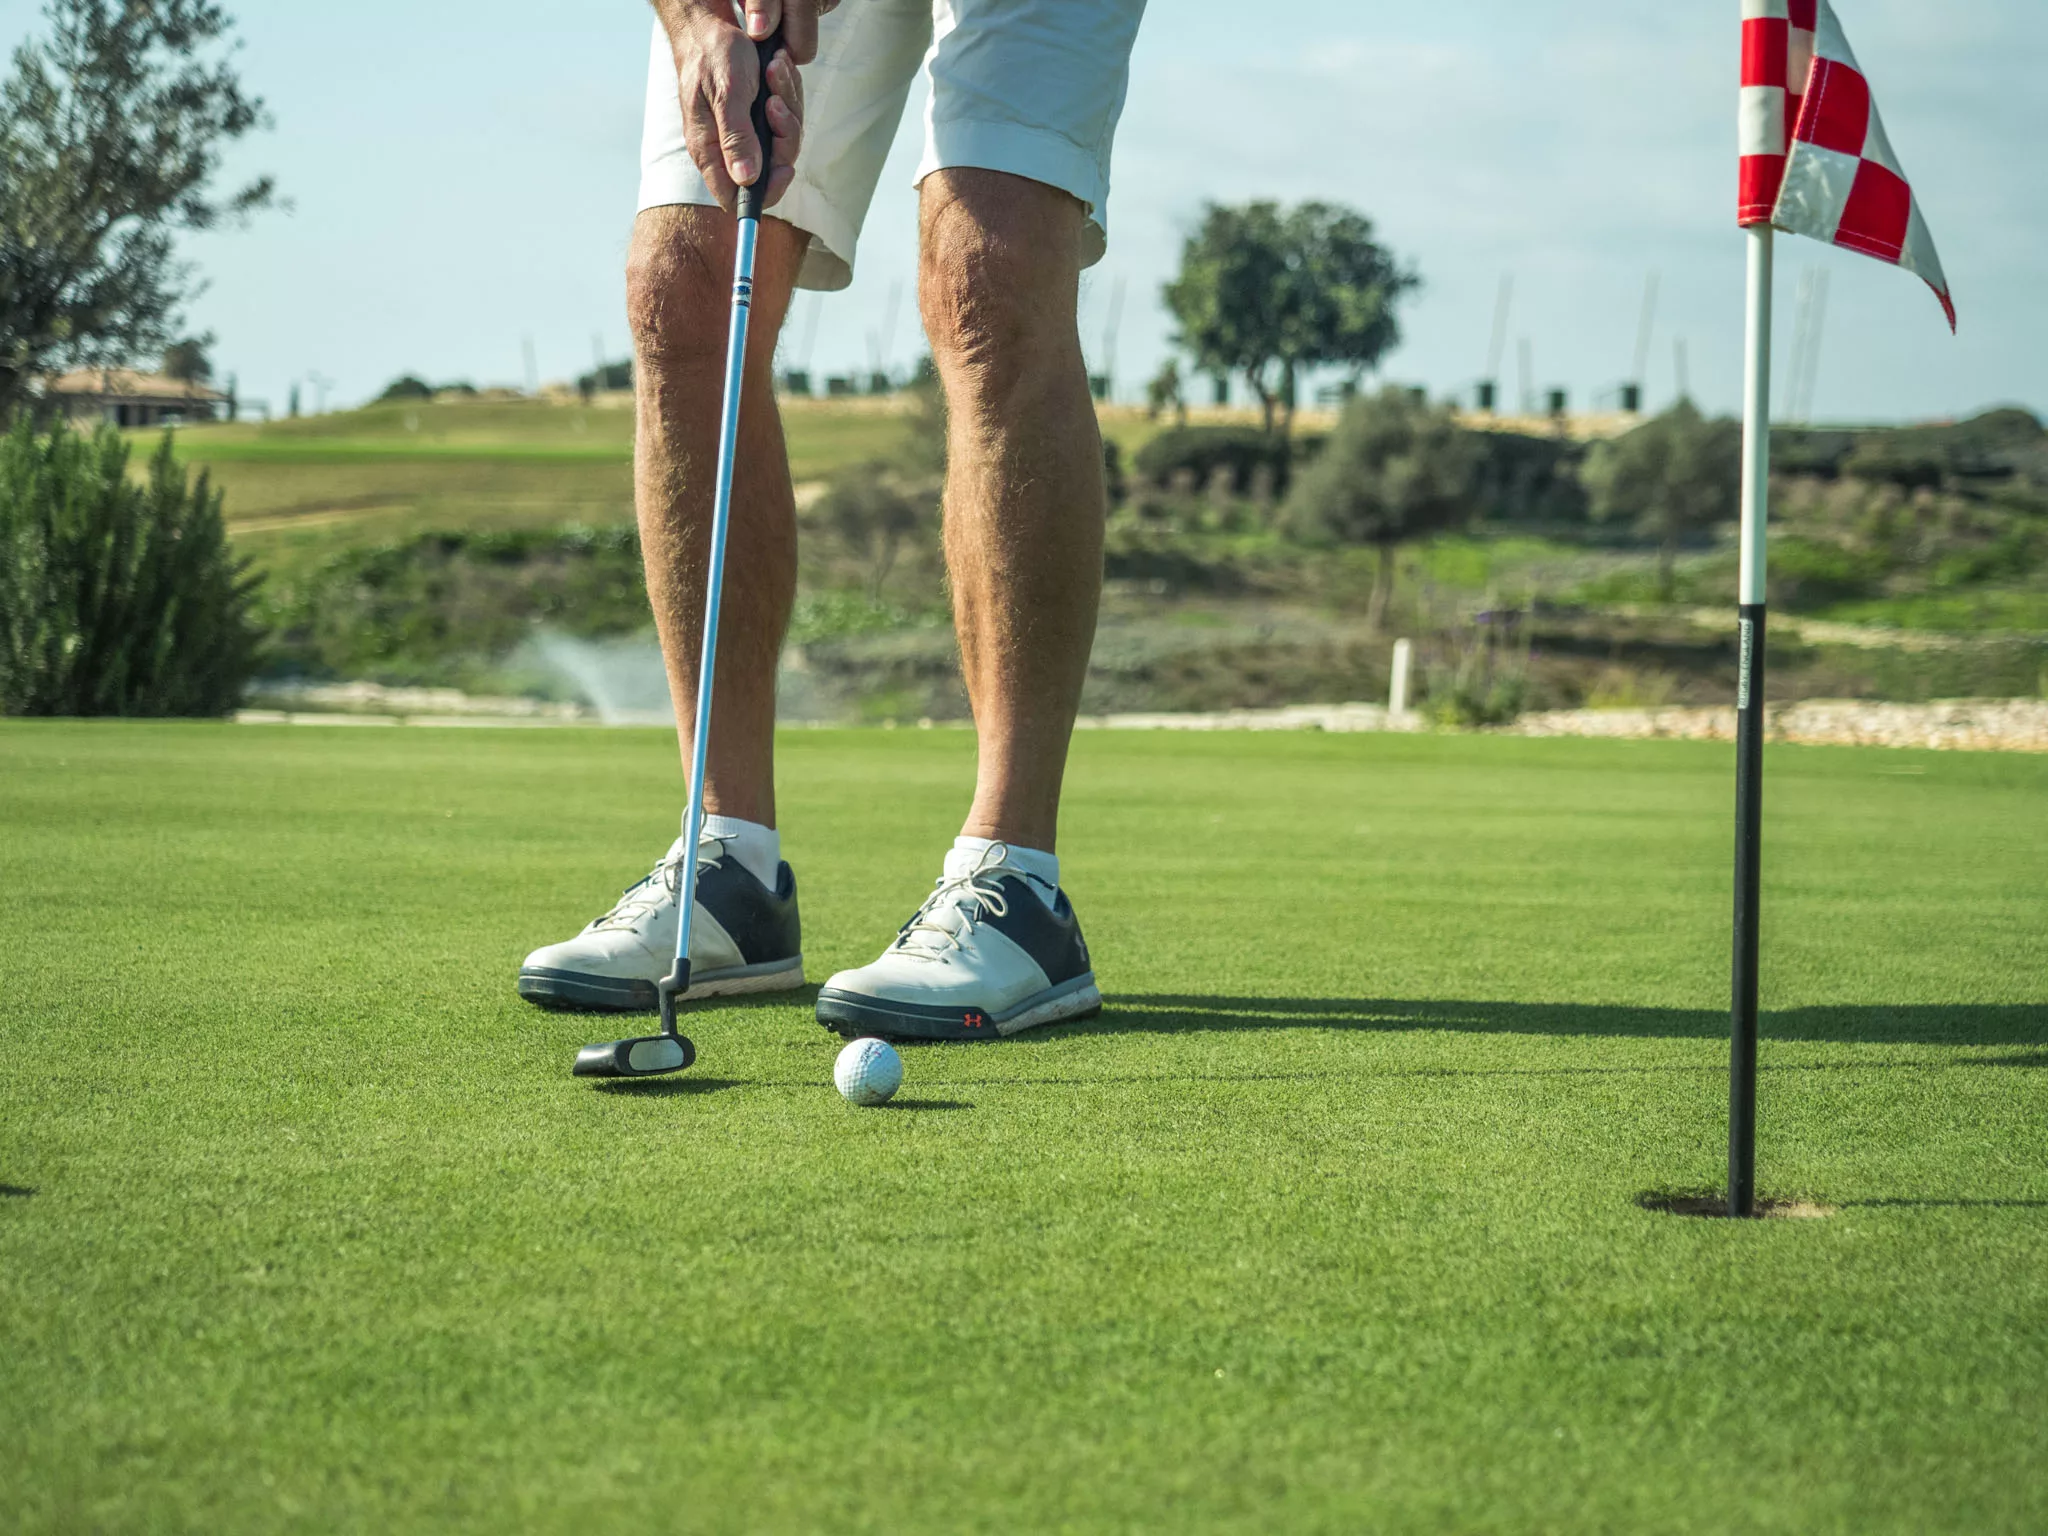 Man's legs and putter as he is poised to putt the ball into golf hole, with practice facilities at Aphrodite Hills PGA National Golf Course in background.